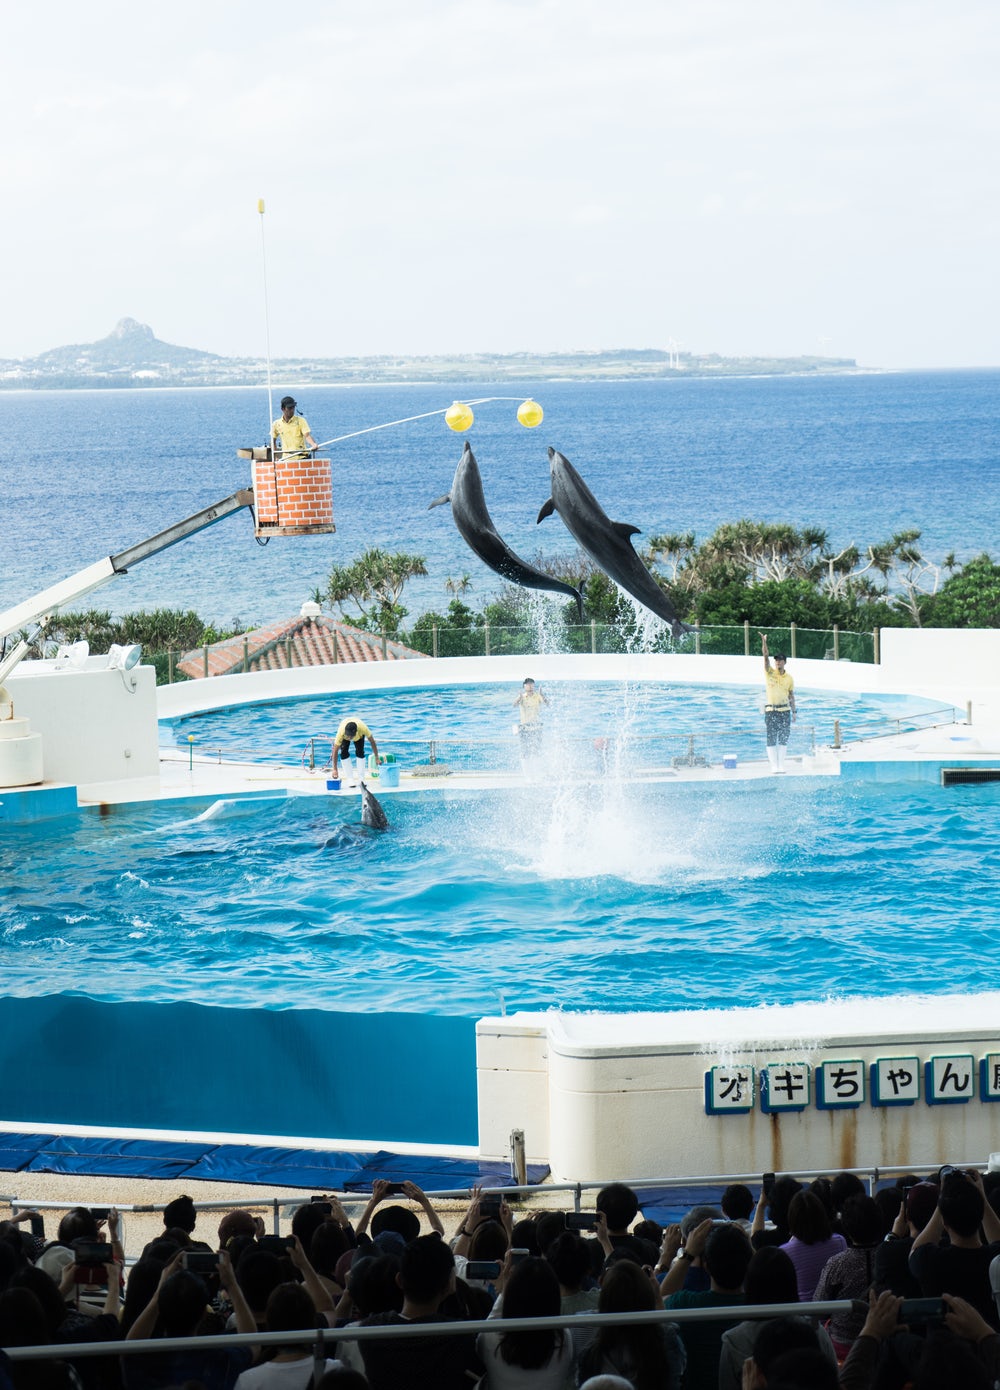 Dolphins, seen performing here in a Japanese aquarium, will be spared from captivity in future in Canada. The entire cetacean group are now protected by law from this kind of treatment. Cetaceans are highly intelligent aquatic mammals.